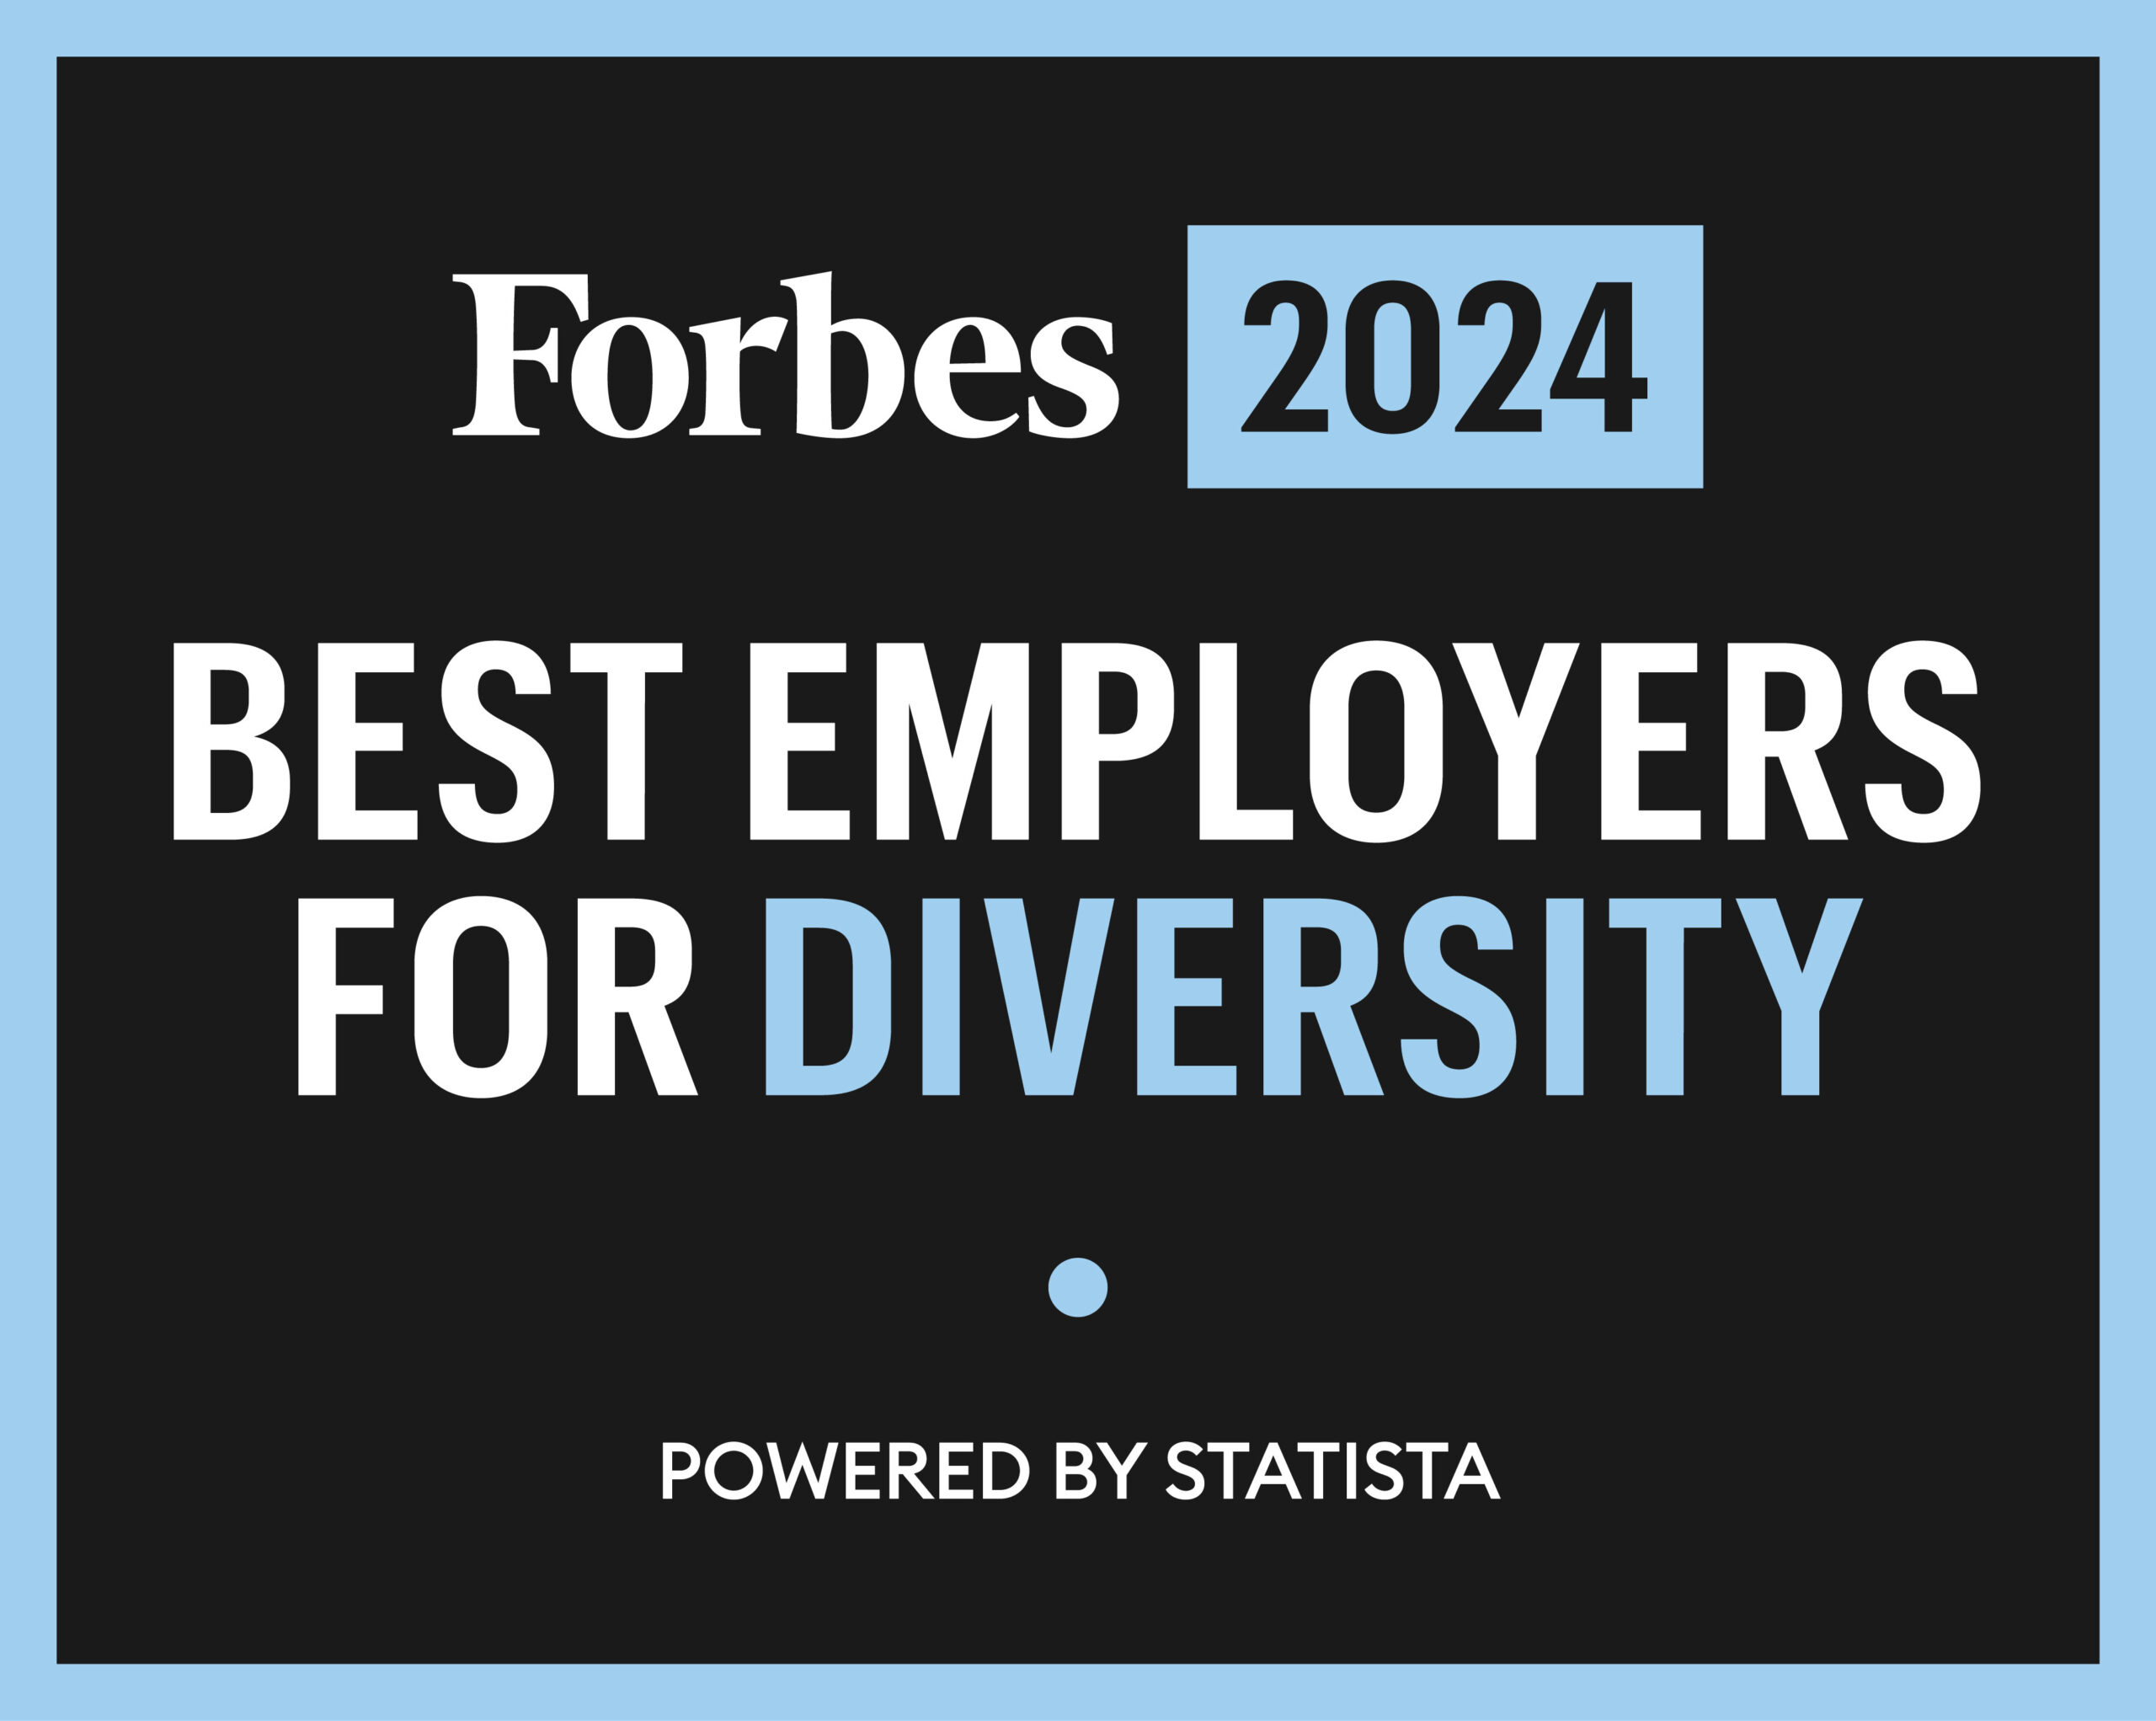 Gannett Recognized as one of the 2024 Best Employers for Diversity by Forbes